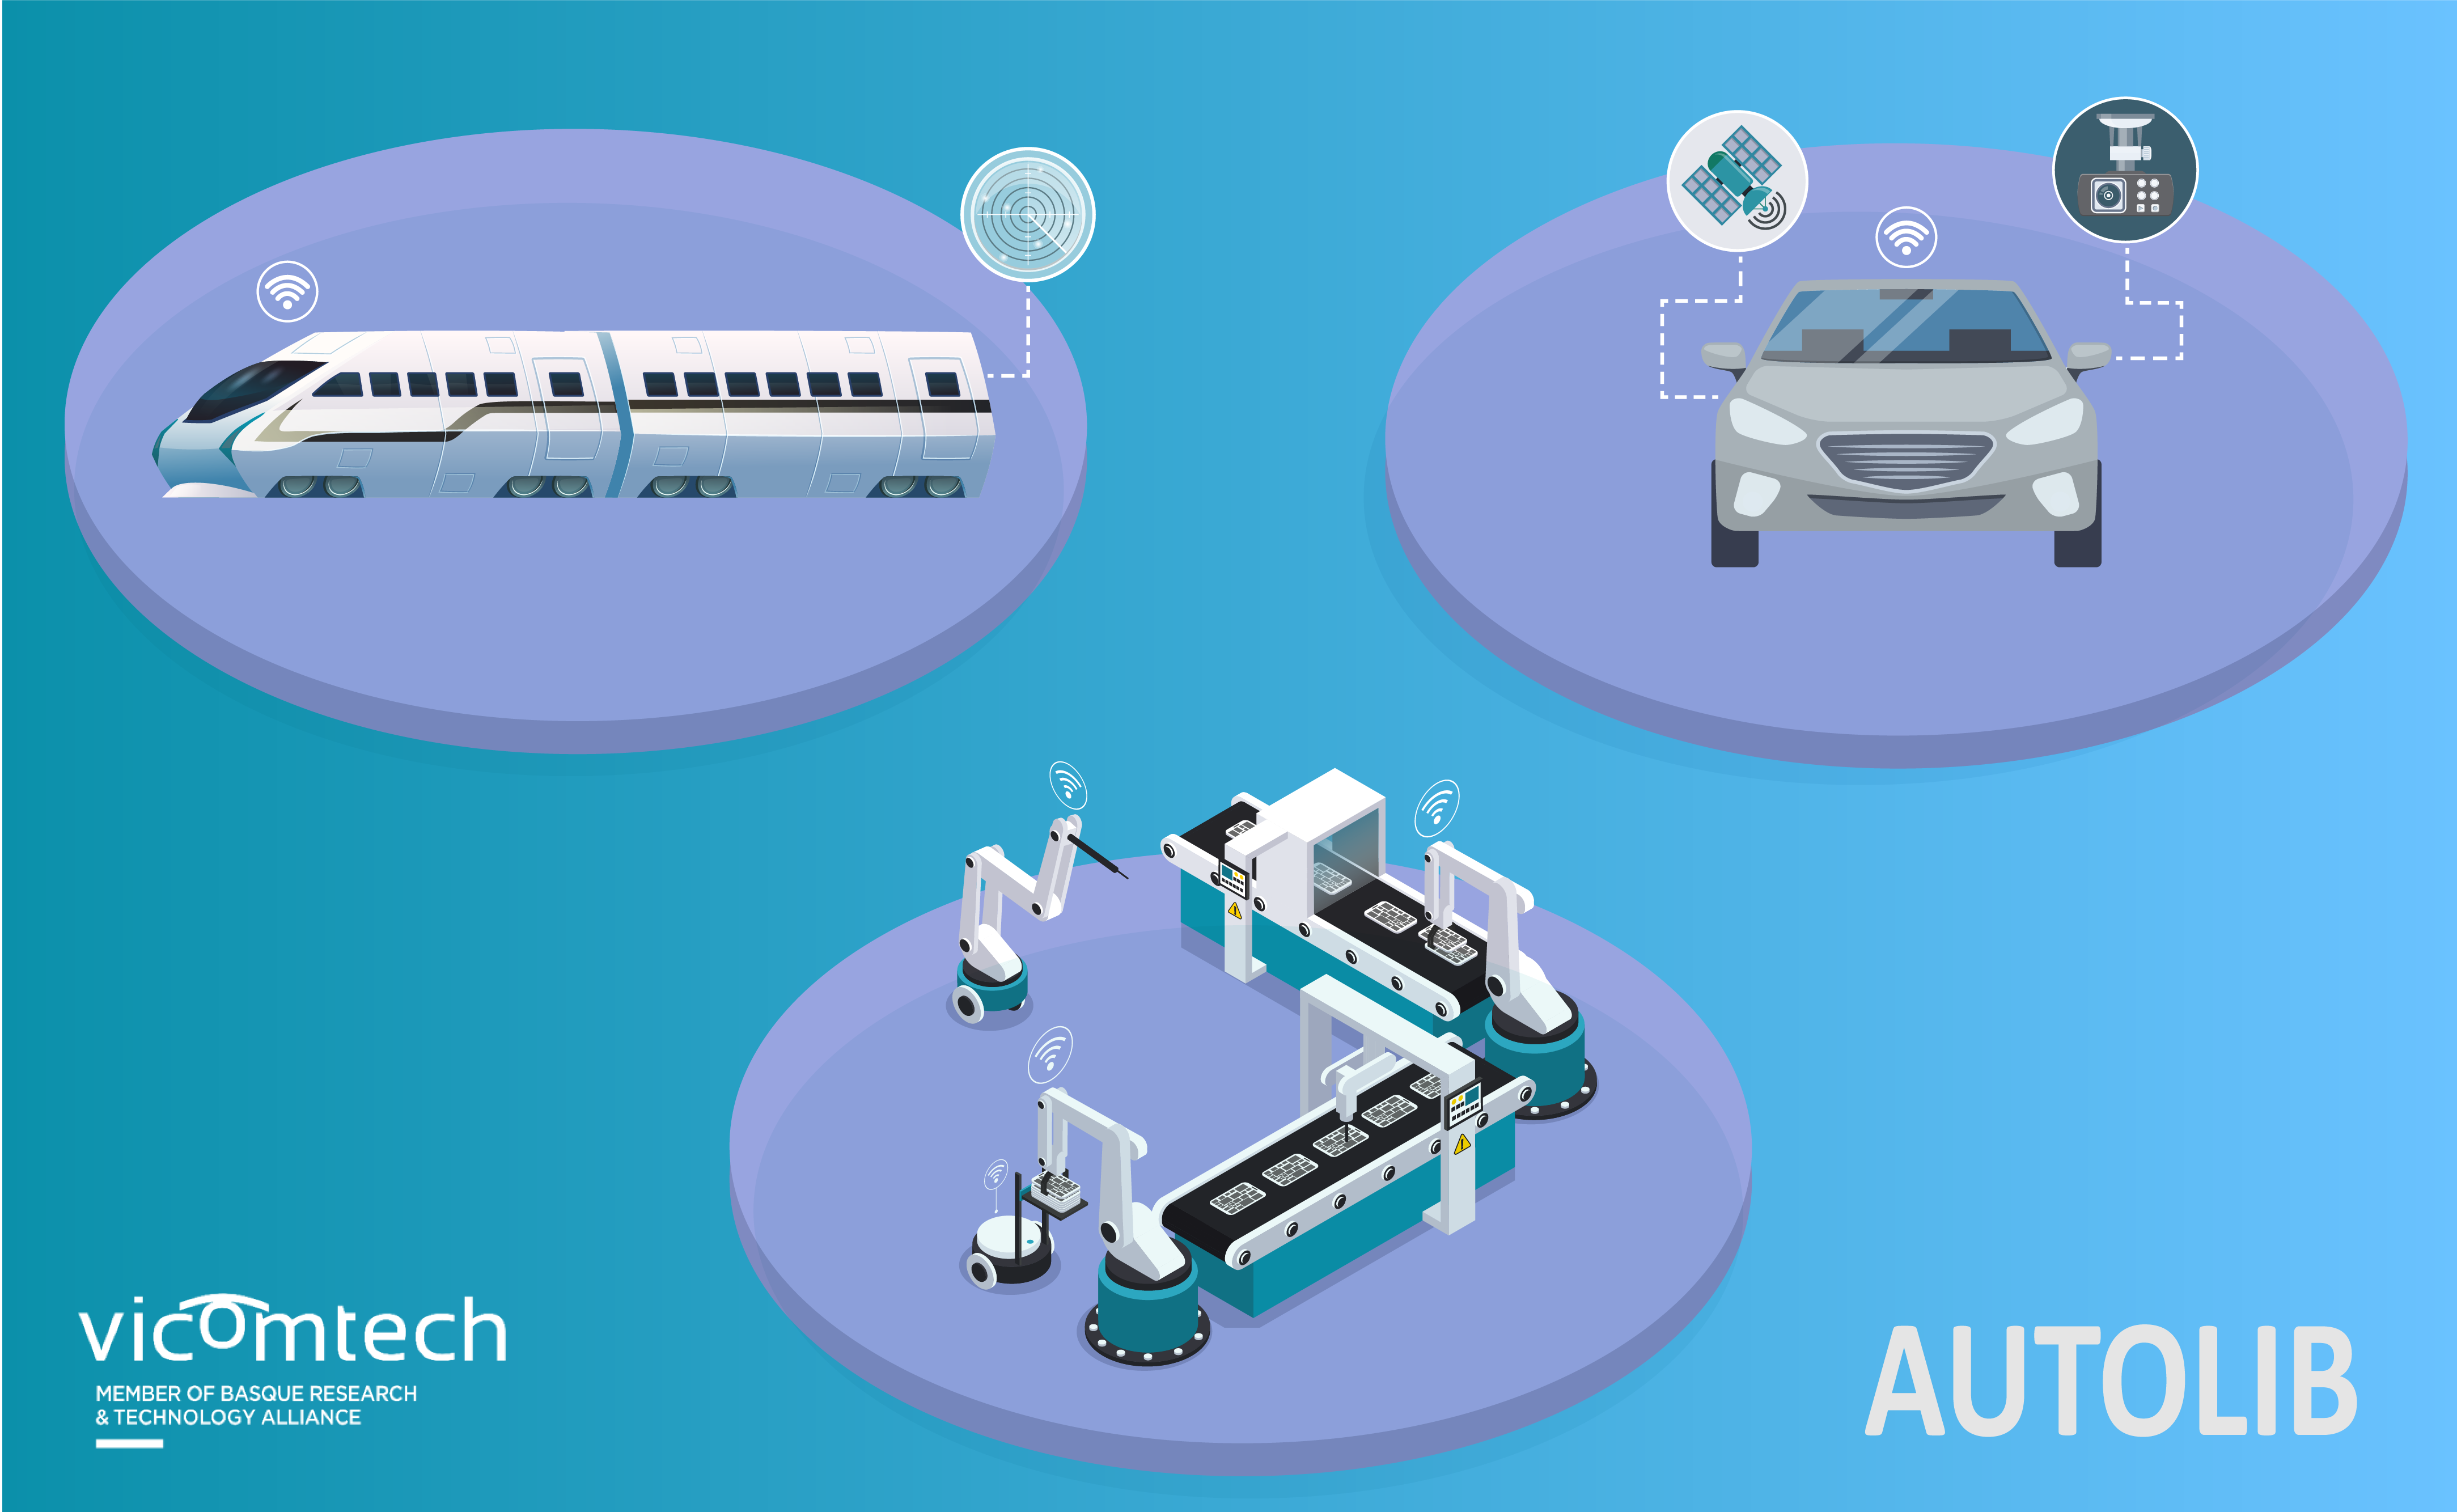 Technology readiness for multi-vehicle automation for the industrial sector